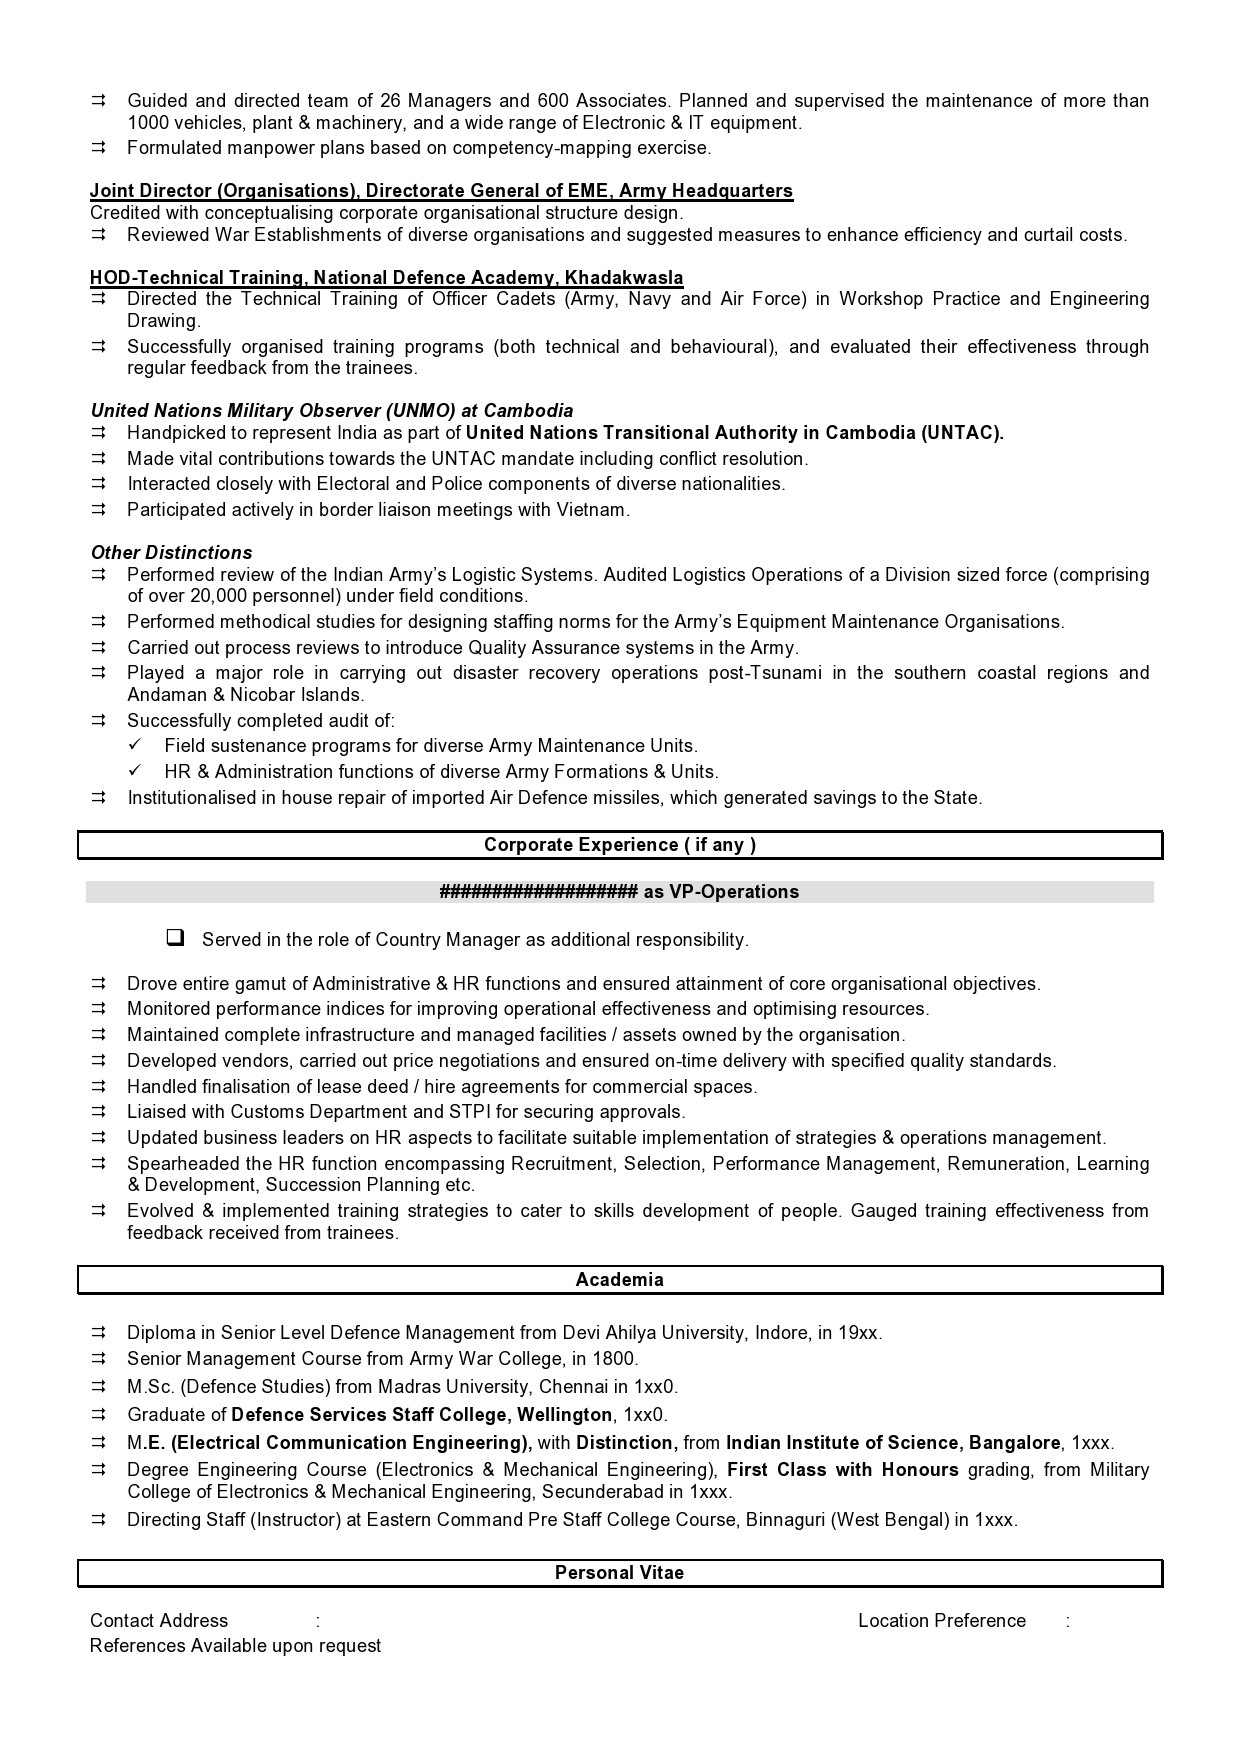 Sample Resume Of Indian Army Officer Army Welfare Placement organisation